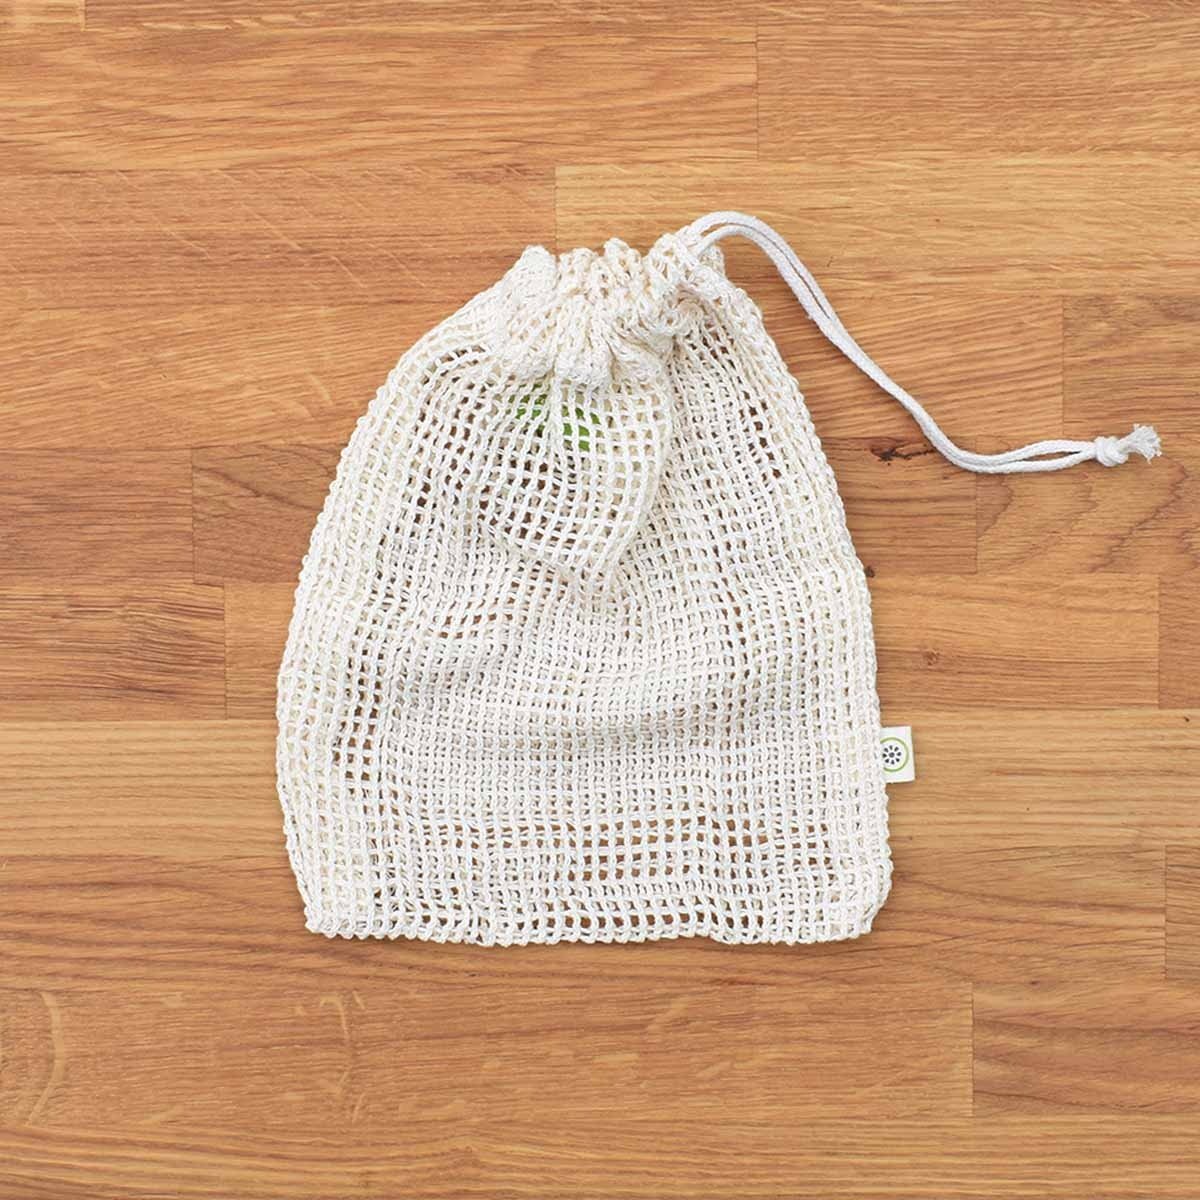 Seed & Sprout Organic Cotton Mesh Produce Bag Set (5 Pack)